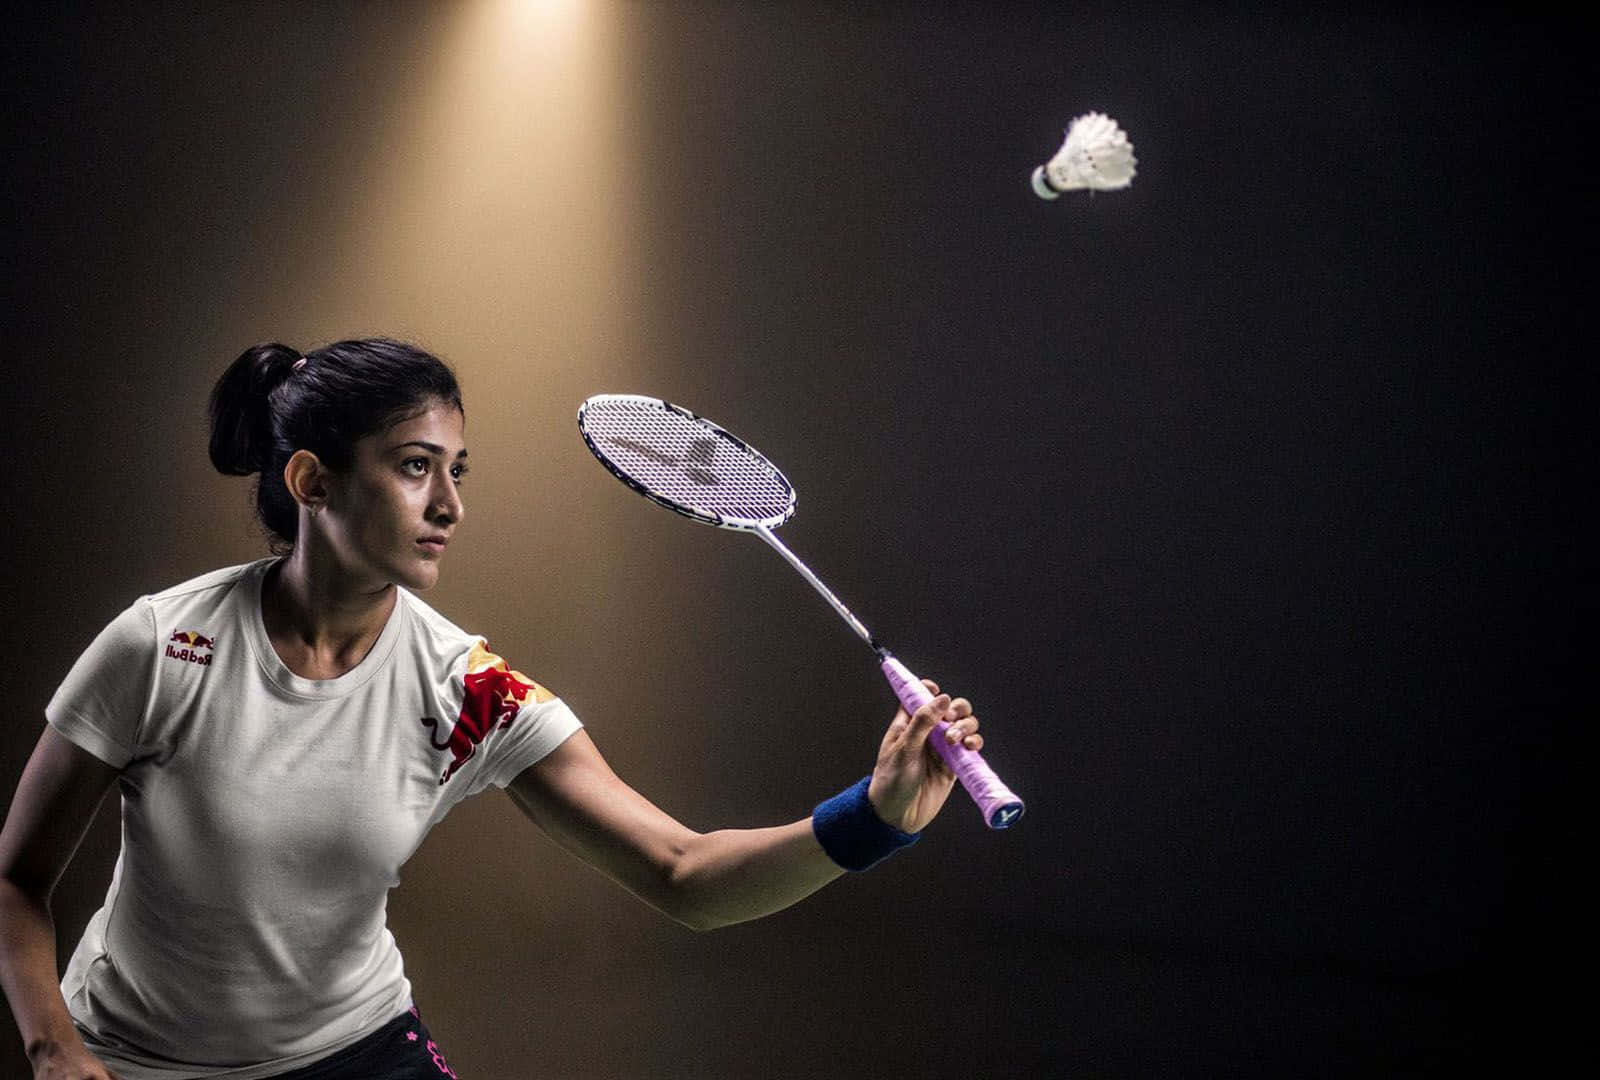 Showcase your inner champion with HD Badminton!